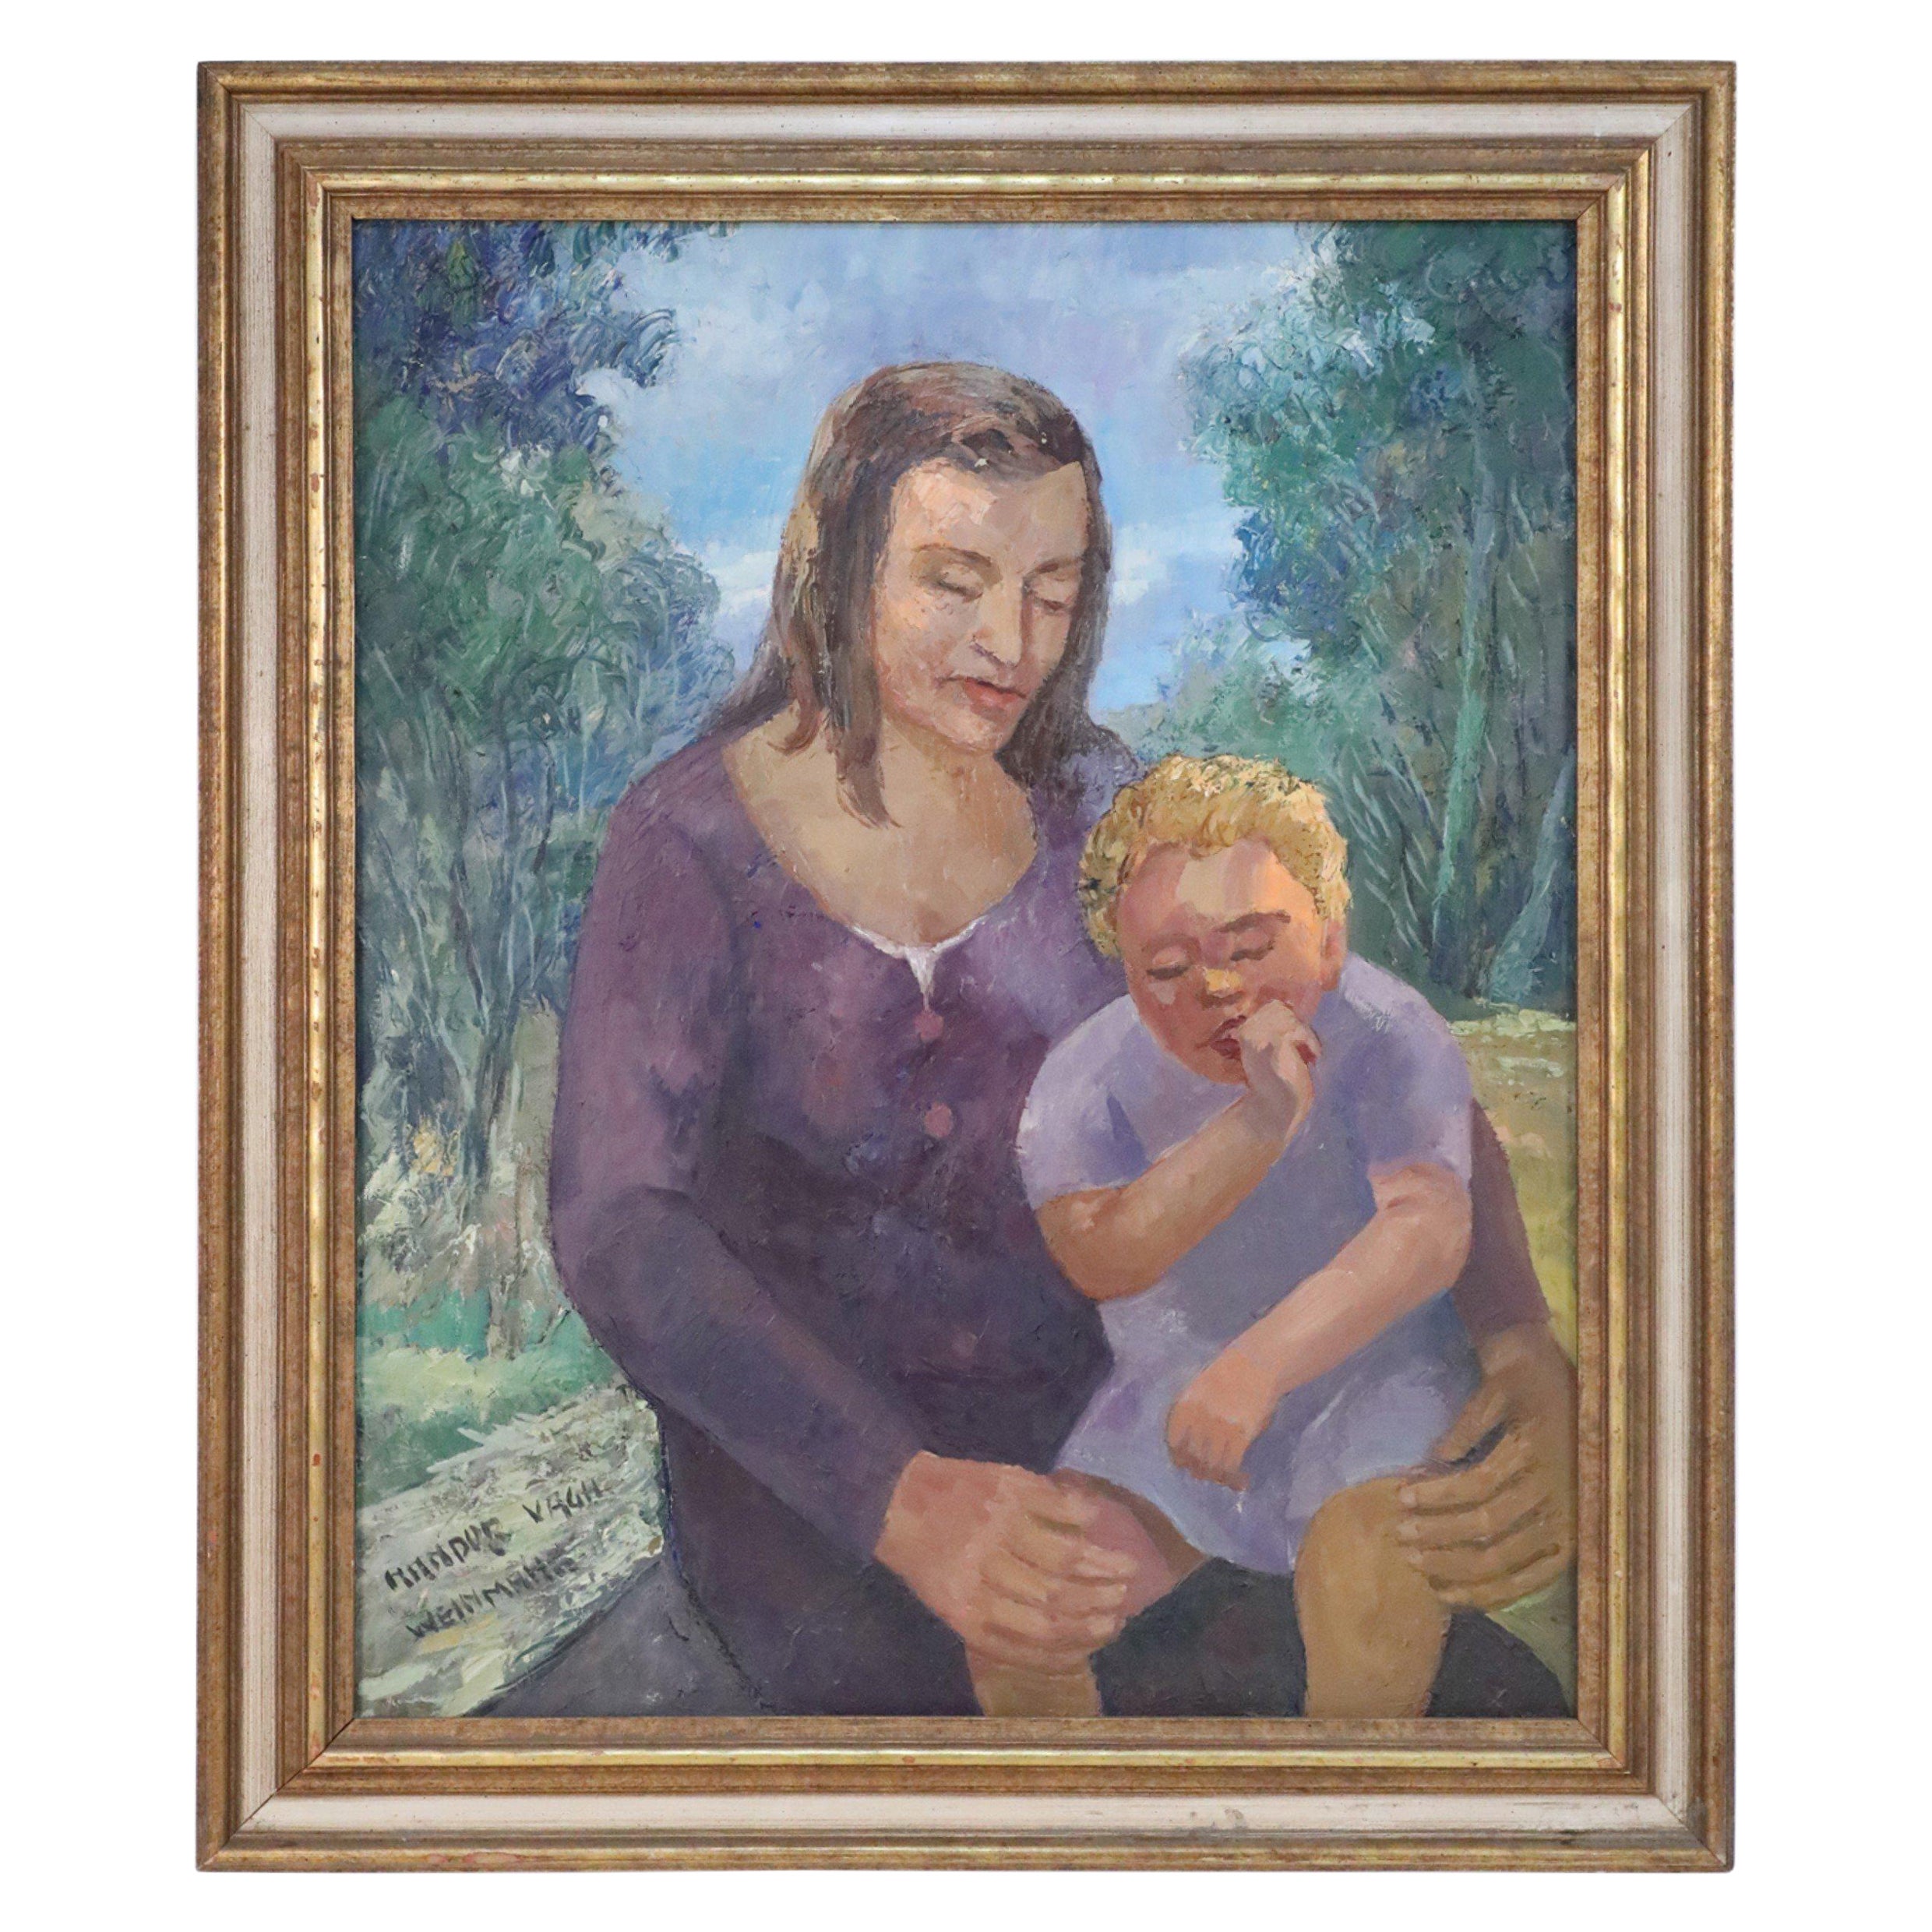 Framed Woman with Child Portrait Oil Painting For Sale at 1stDibs